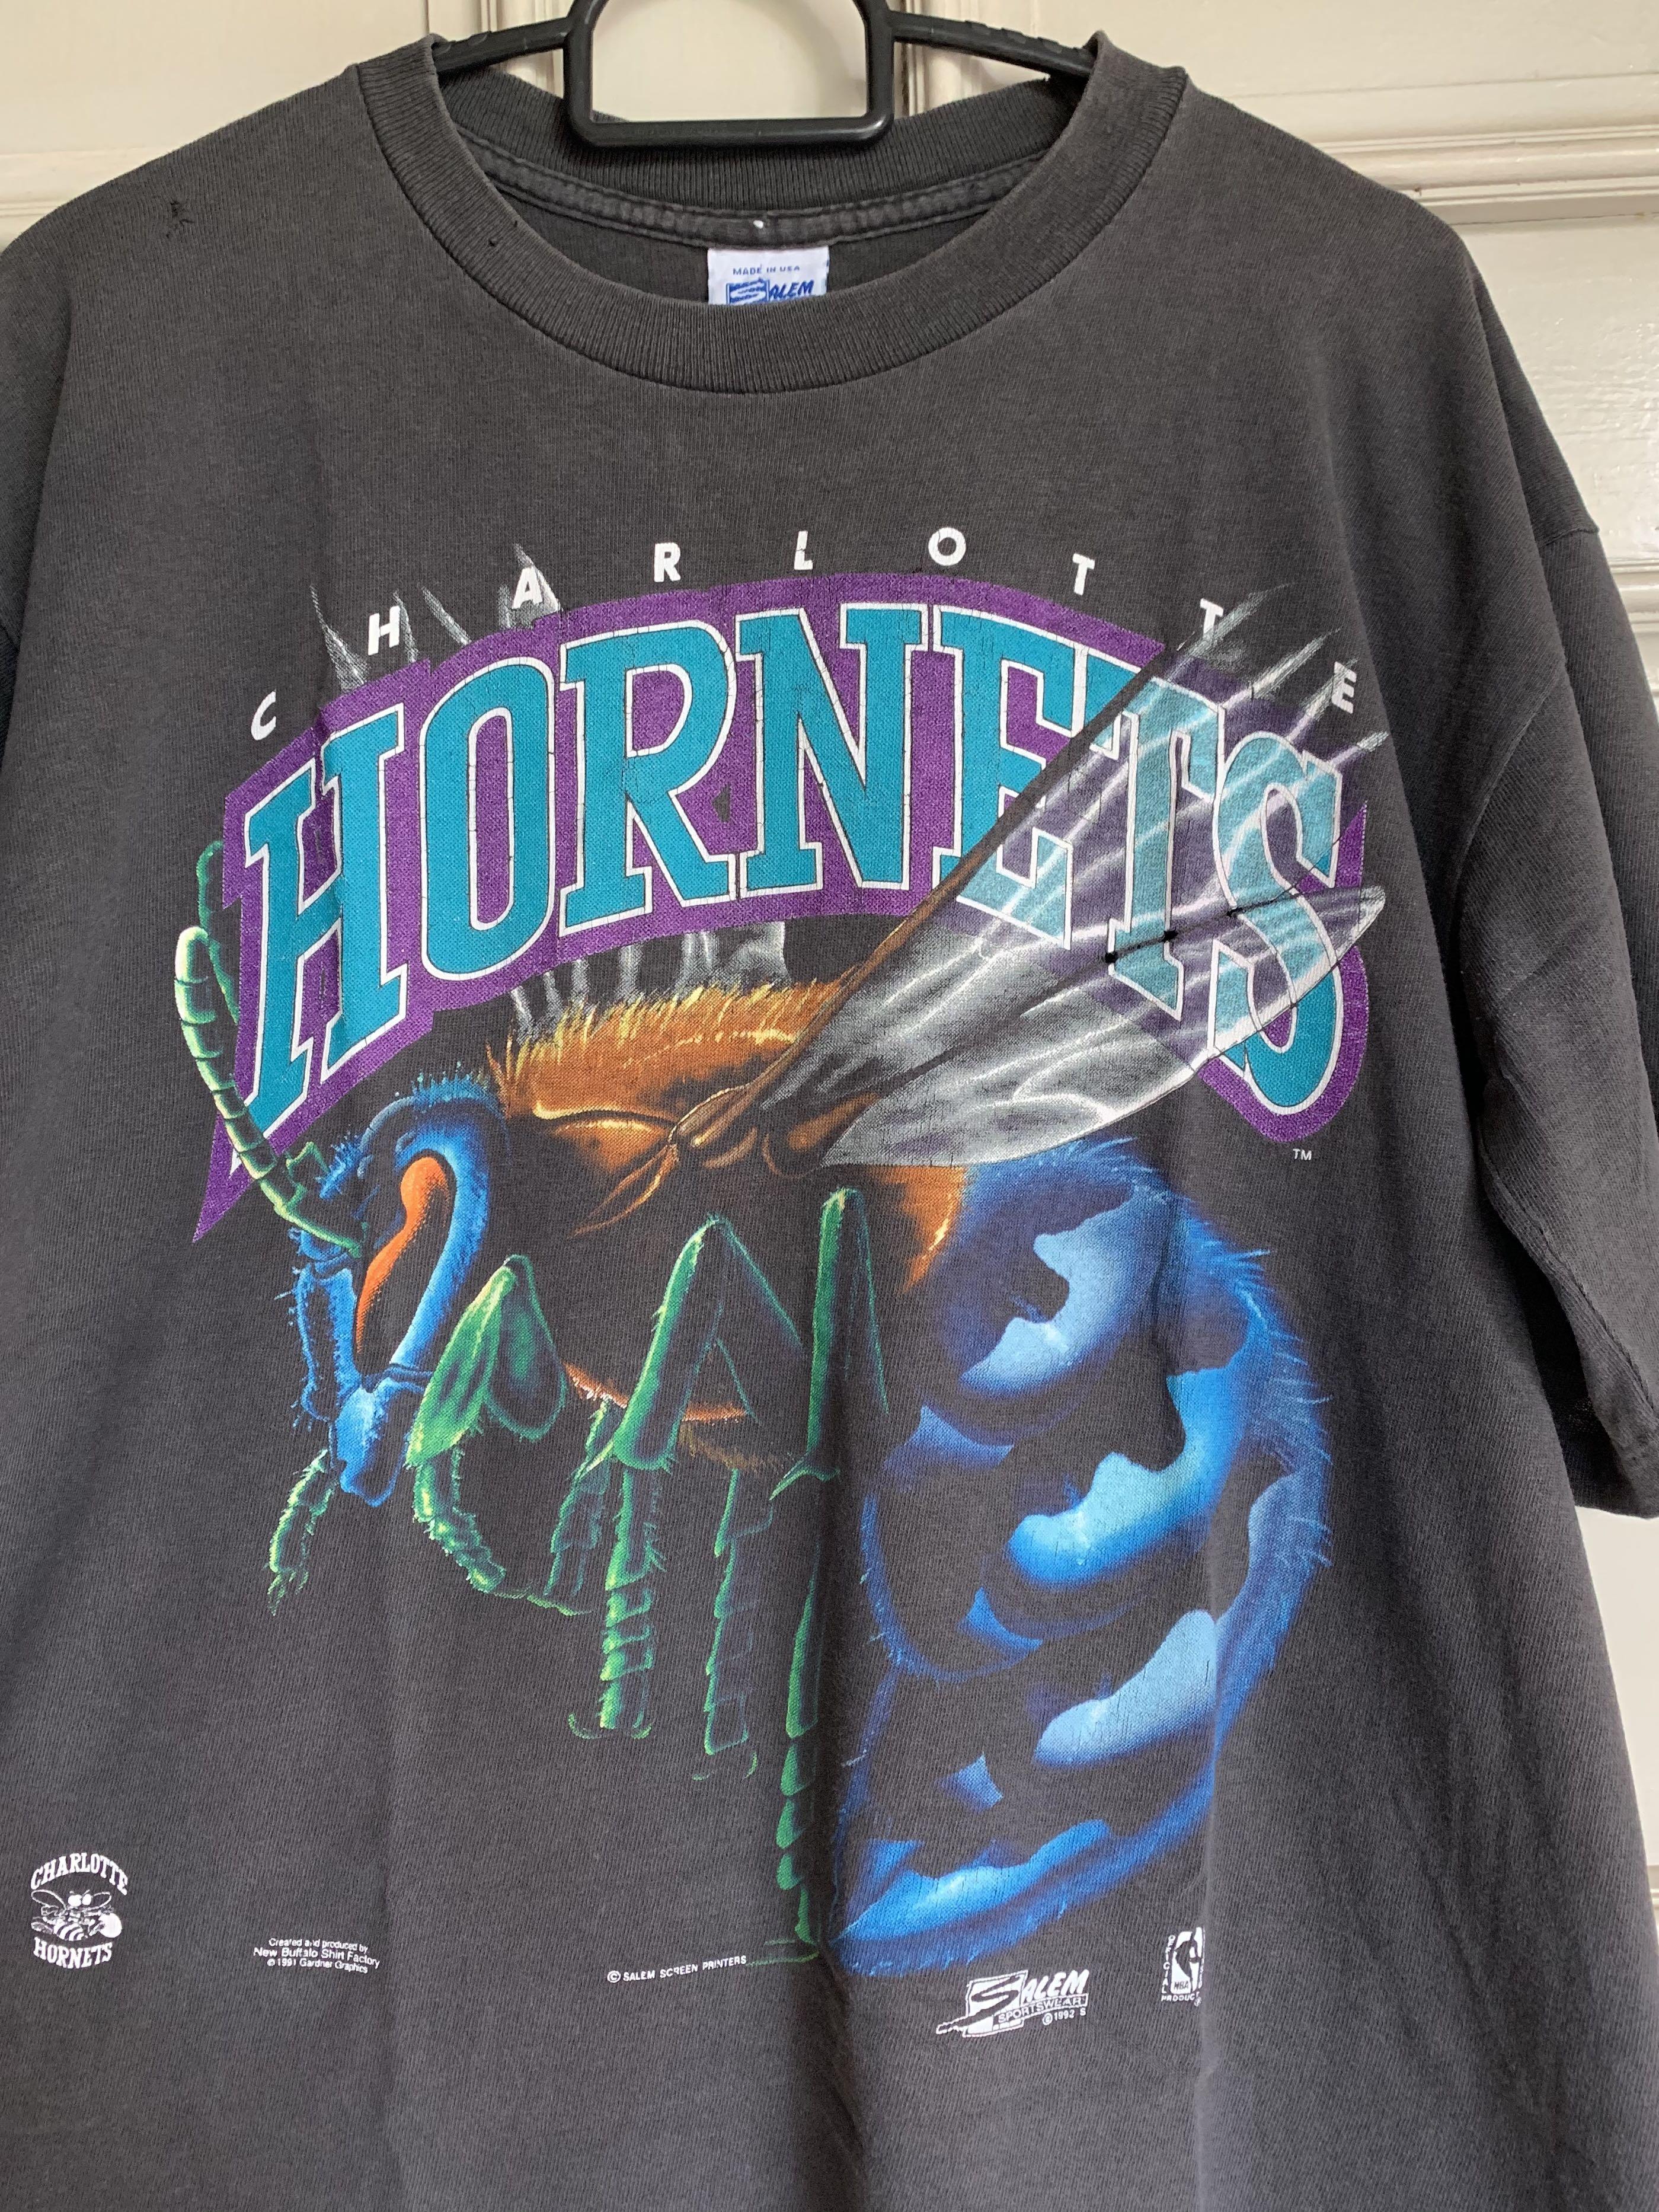 VINTAGE NBA CHARLOTTE HORNETS TEE SHIRT SIZE XL MADE IN USA